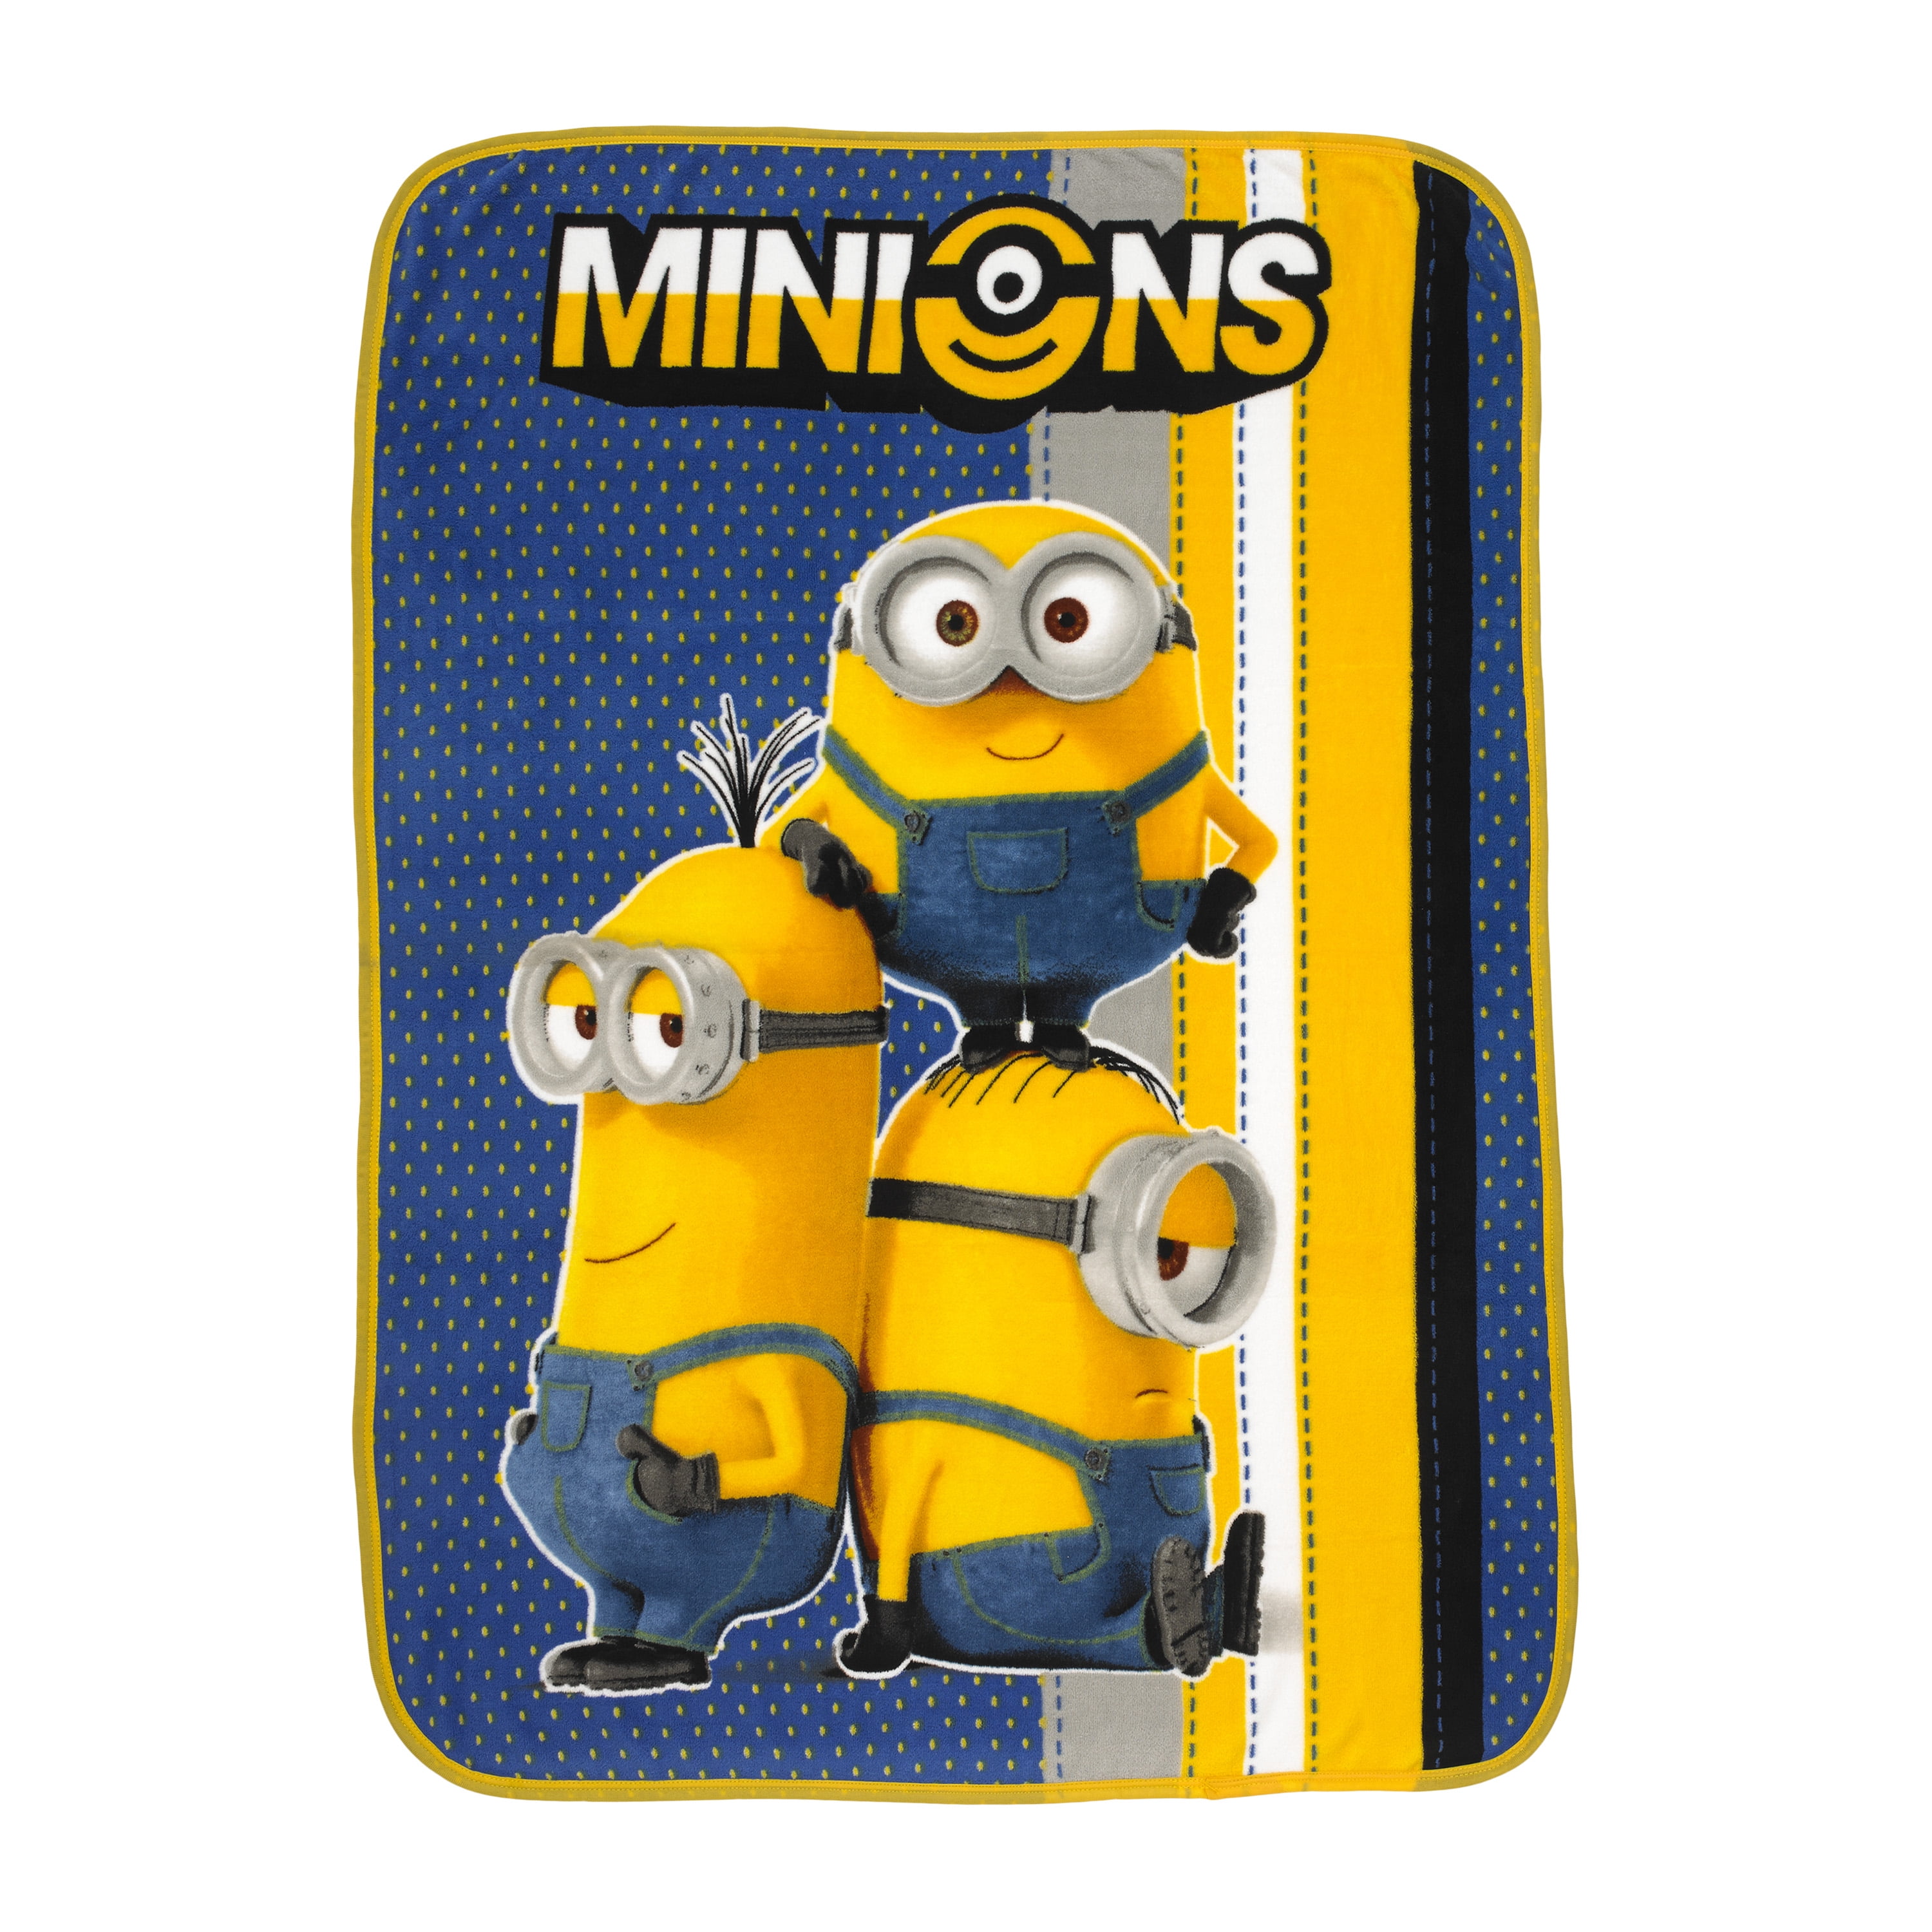 Fleece Blanket Grey Minions Despicable Me The next big thing 